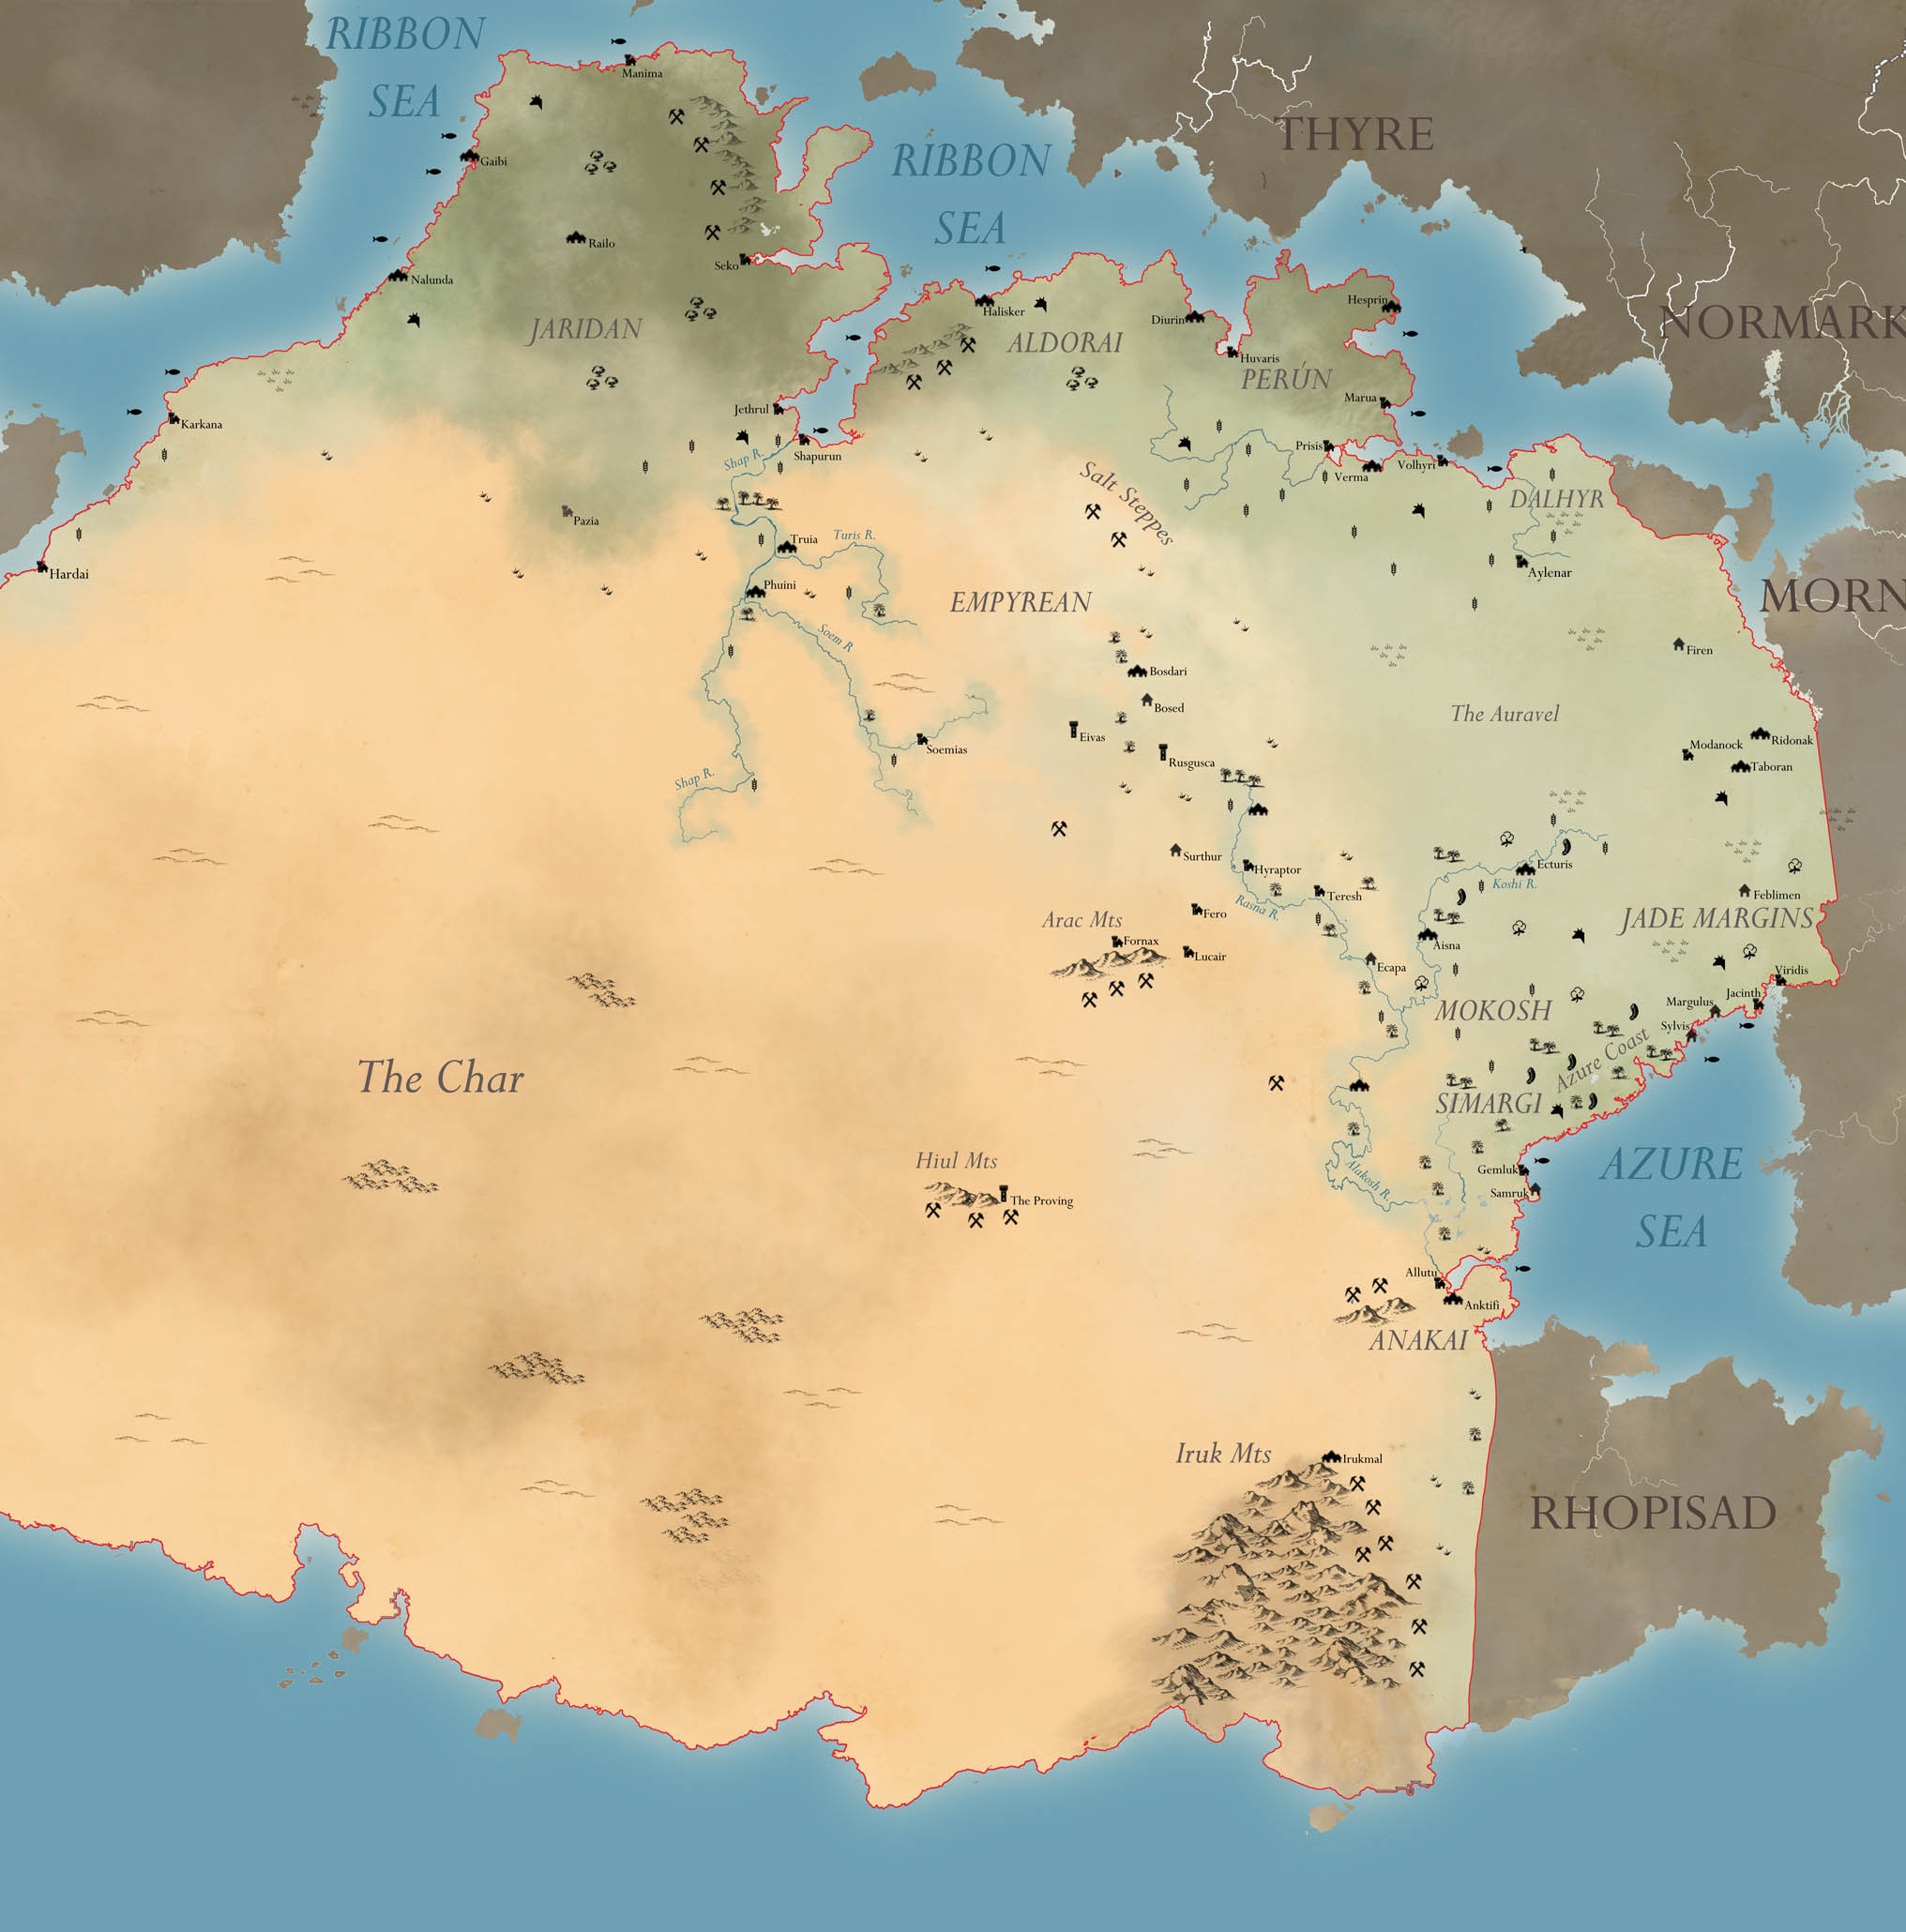 Making Middle Earth maps with R